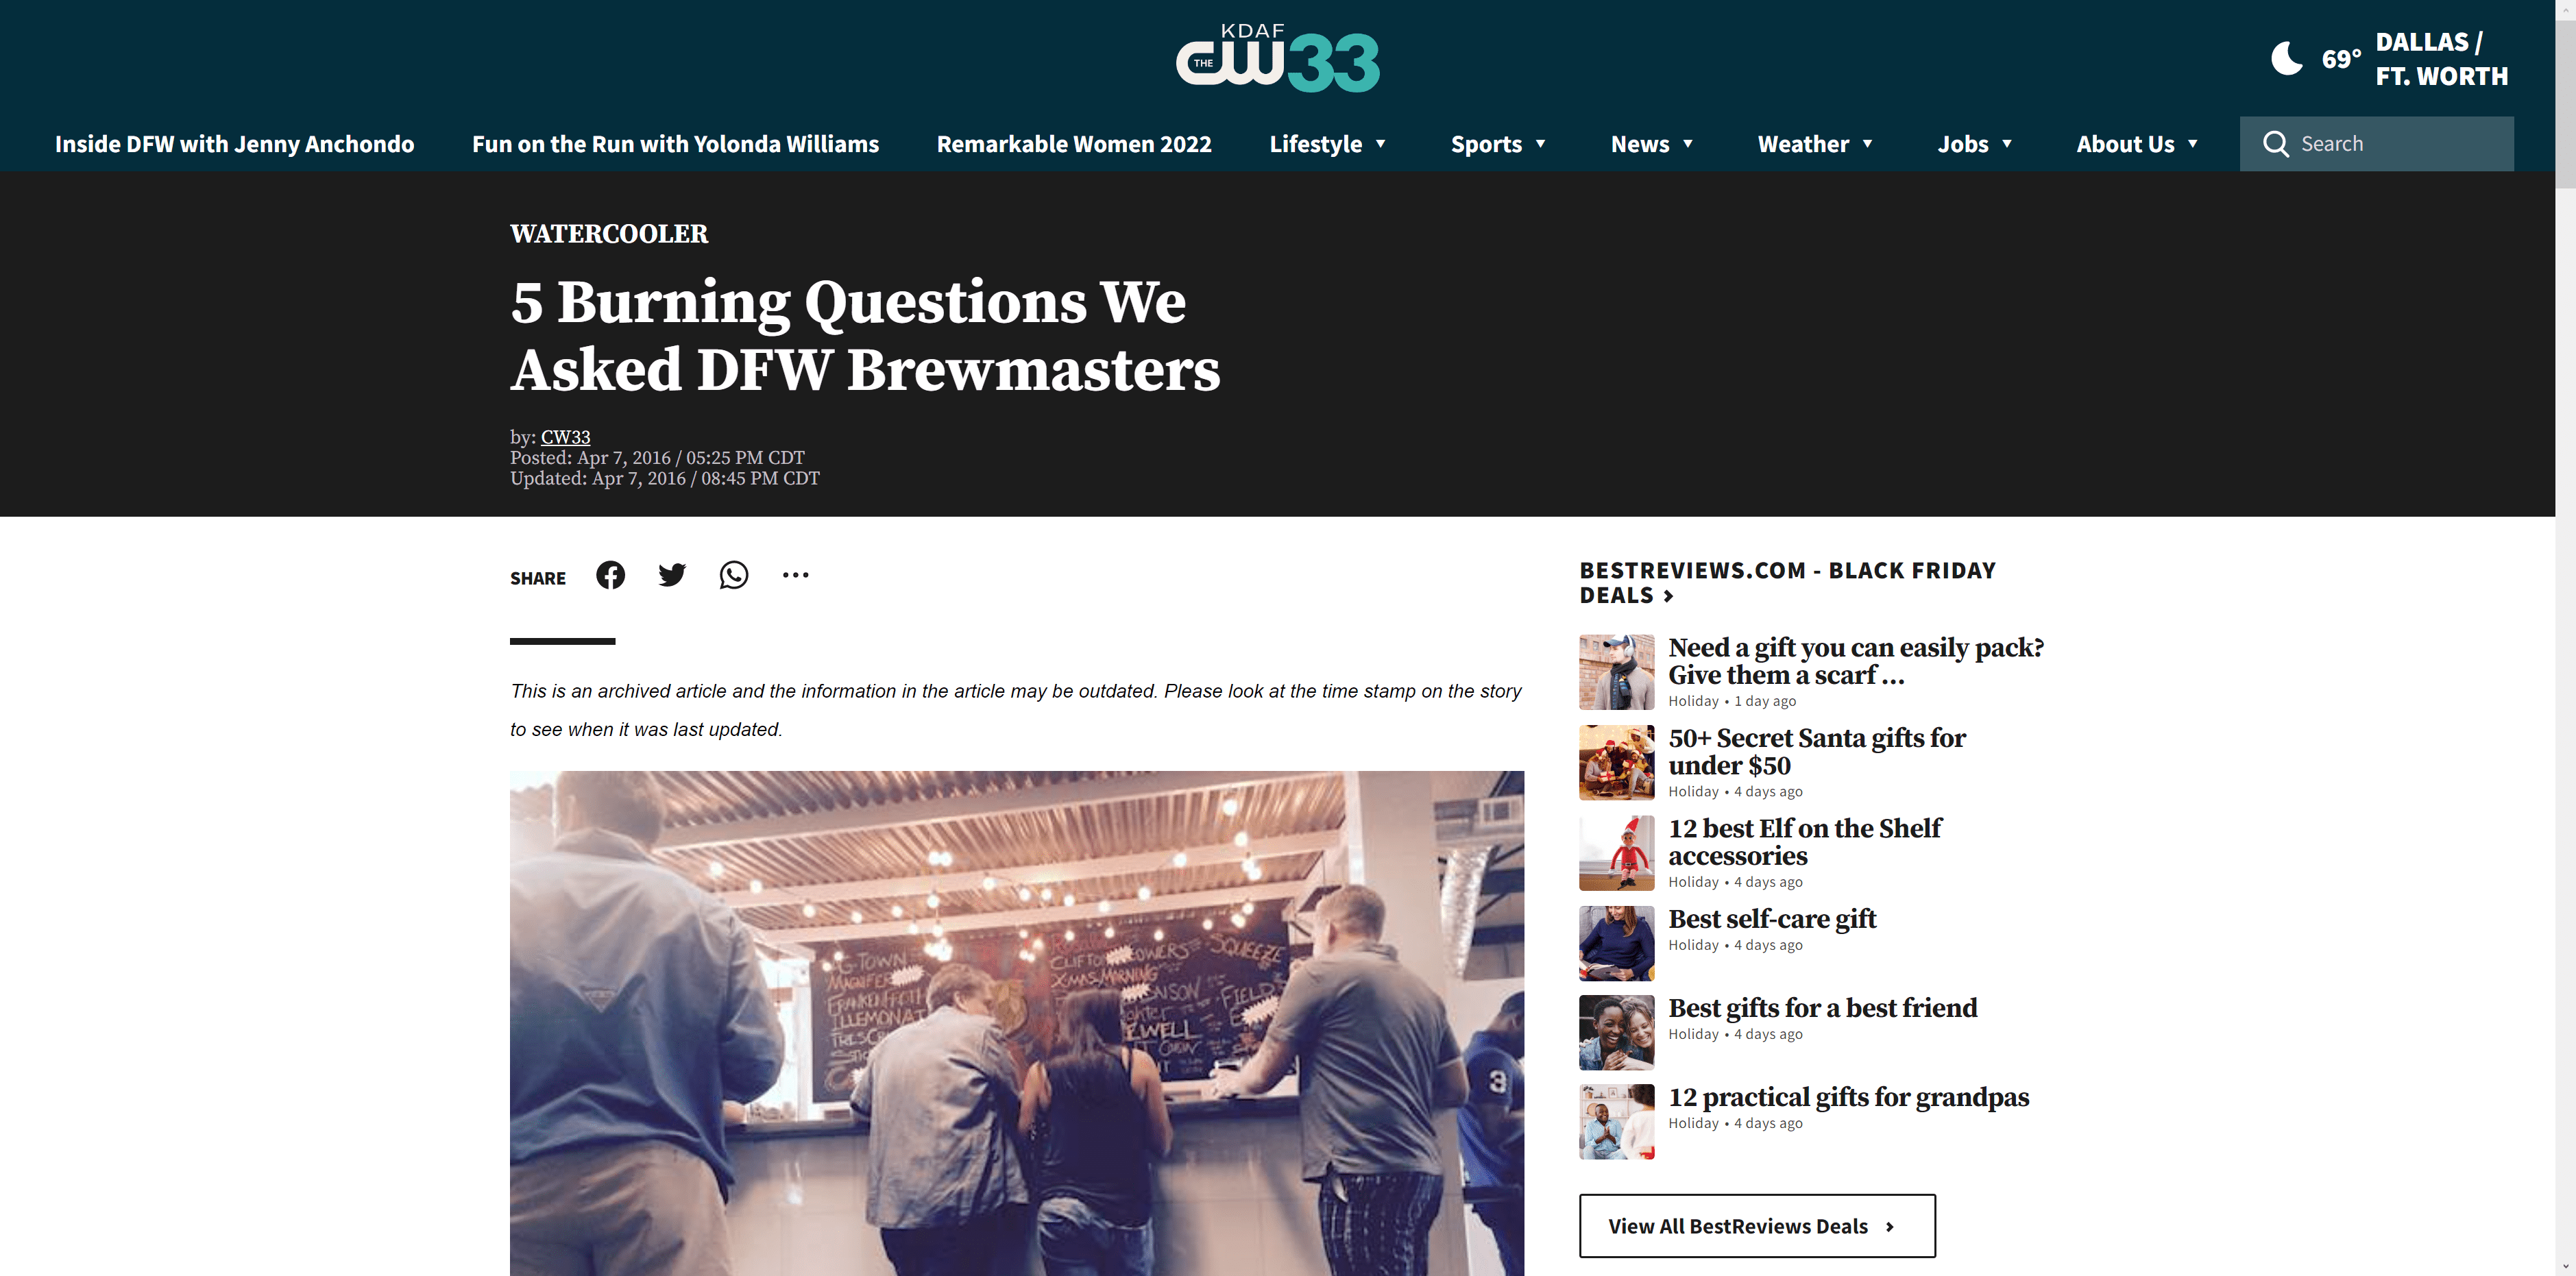 5 burning questions for DFW brewmasters on CW33